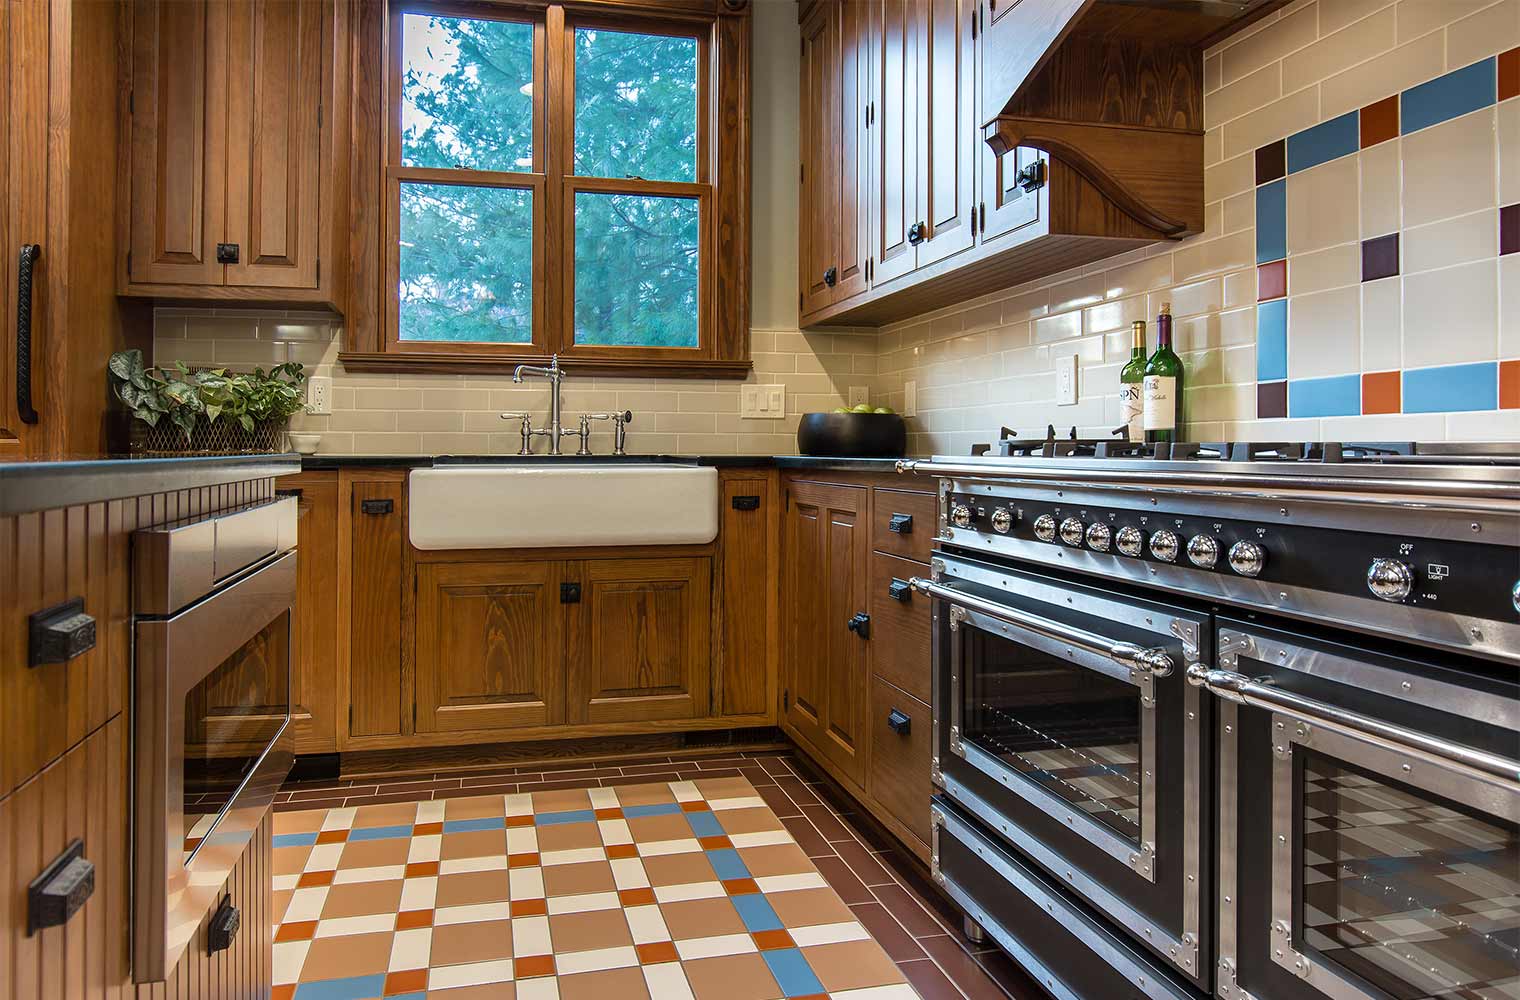 kitchen remodel in Des Moines Victorian home renovation by Silent Rivers includes commercial ovens, farmhouse sink, custom cabinets, floor tile and hardware that matches historic period